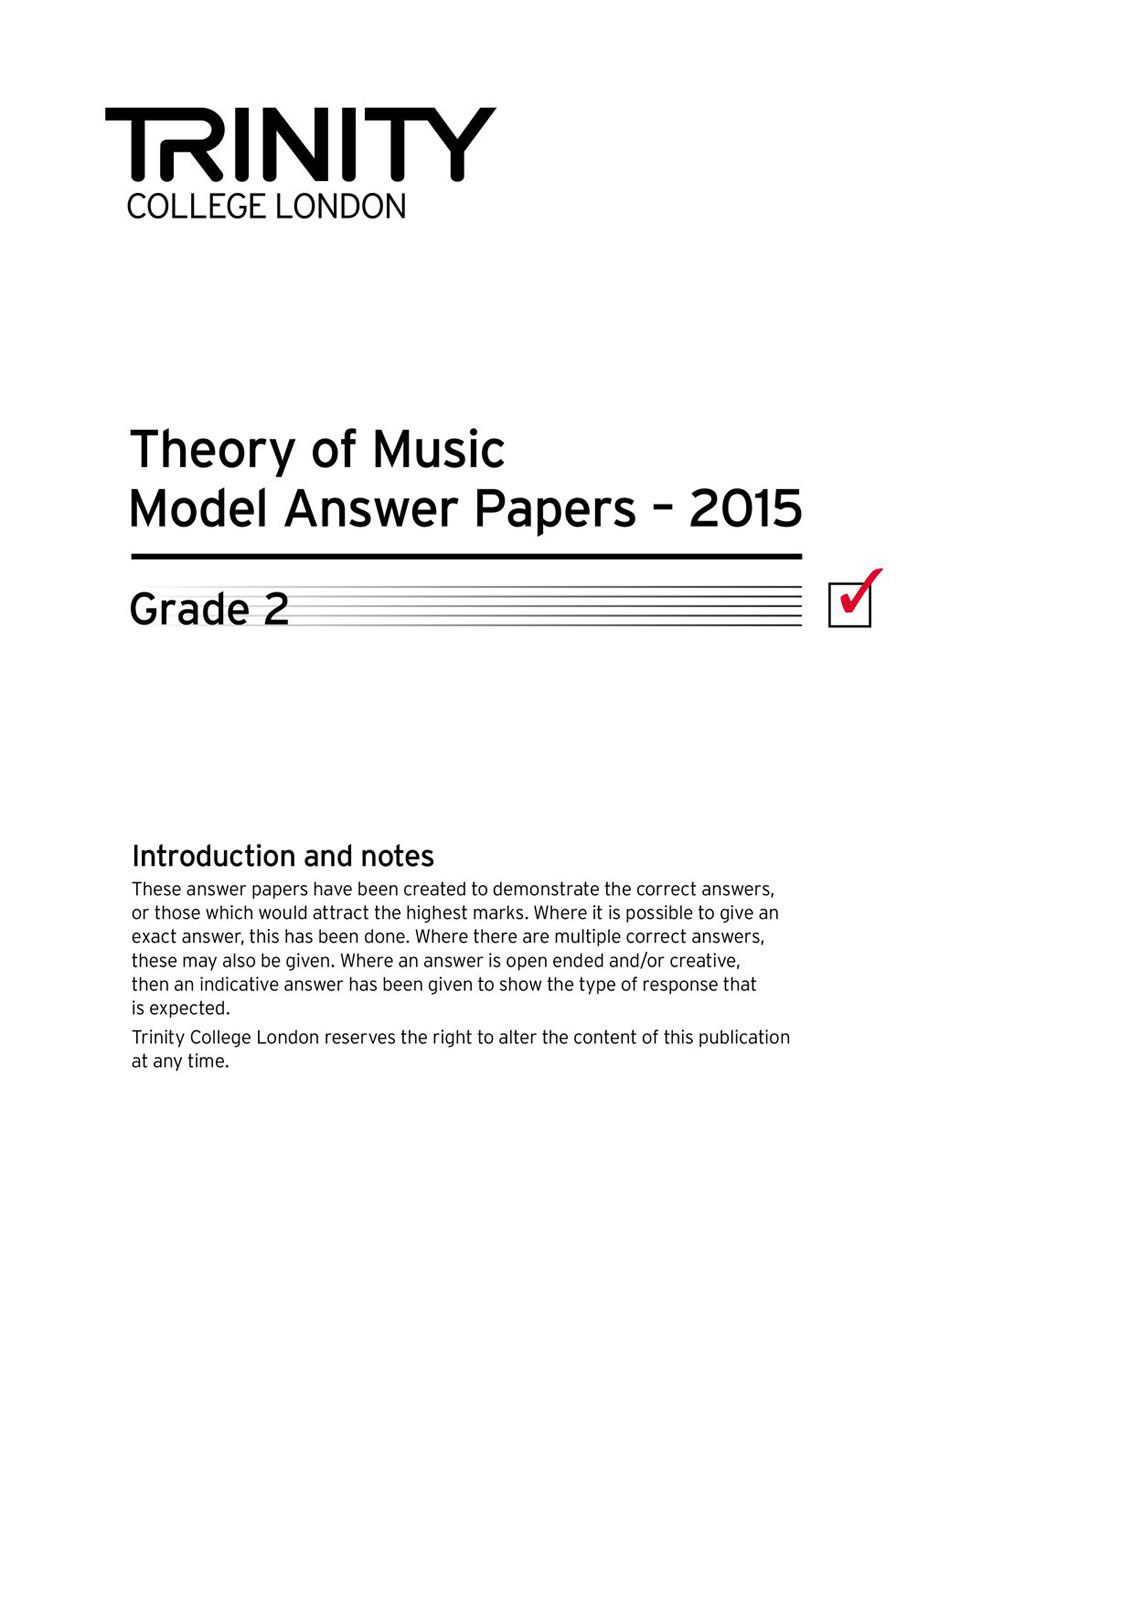 TRINITY GUILDHALL TRINITY COLLEGE LONDON THEORY MODEL ANSWERS PAPER (2015) GRADE 2 (ALL INSTRUMENTS) 